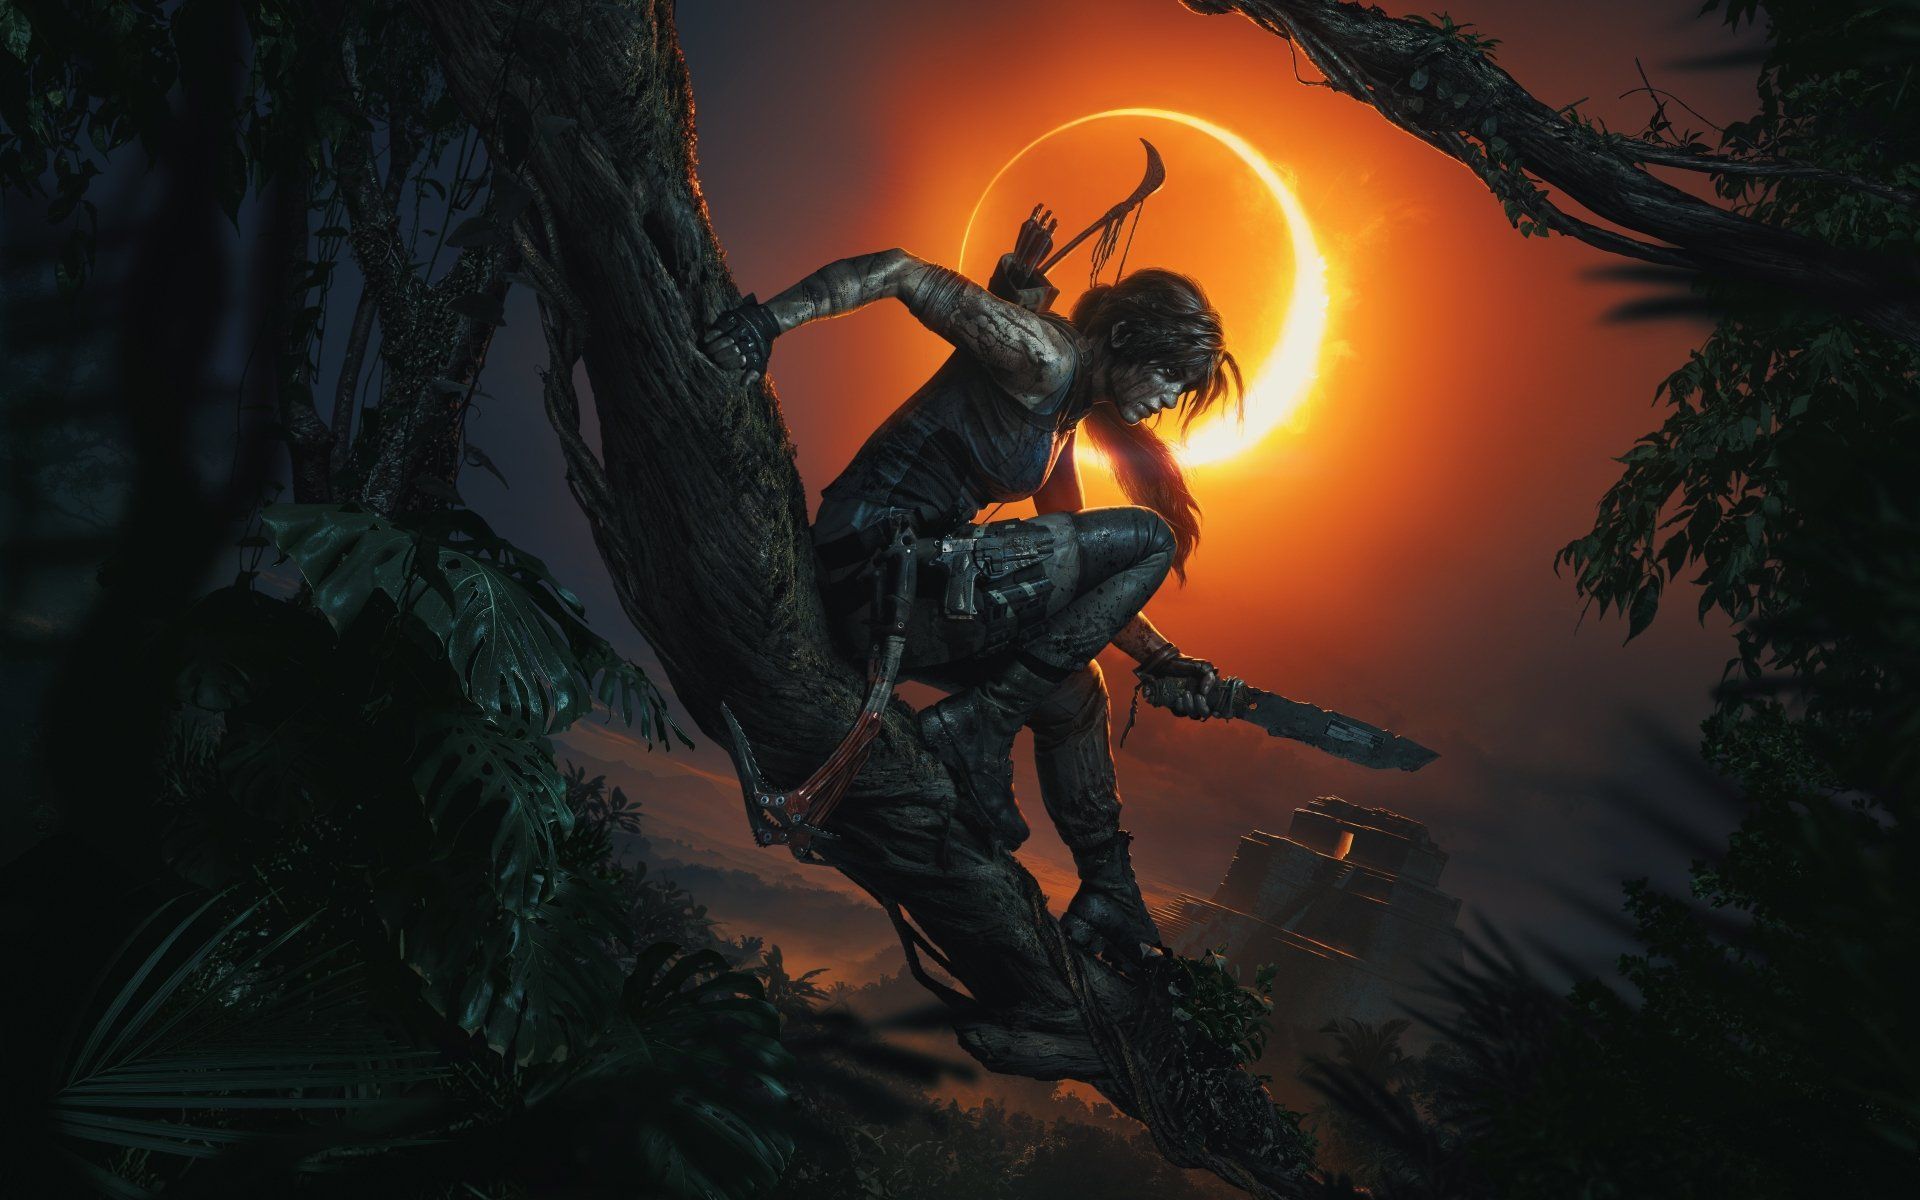 Shadow Of The Tomb Raider Wallpaper Free Shadow Of The Tomb